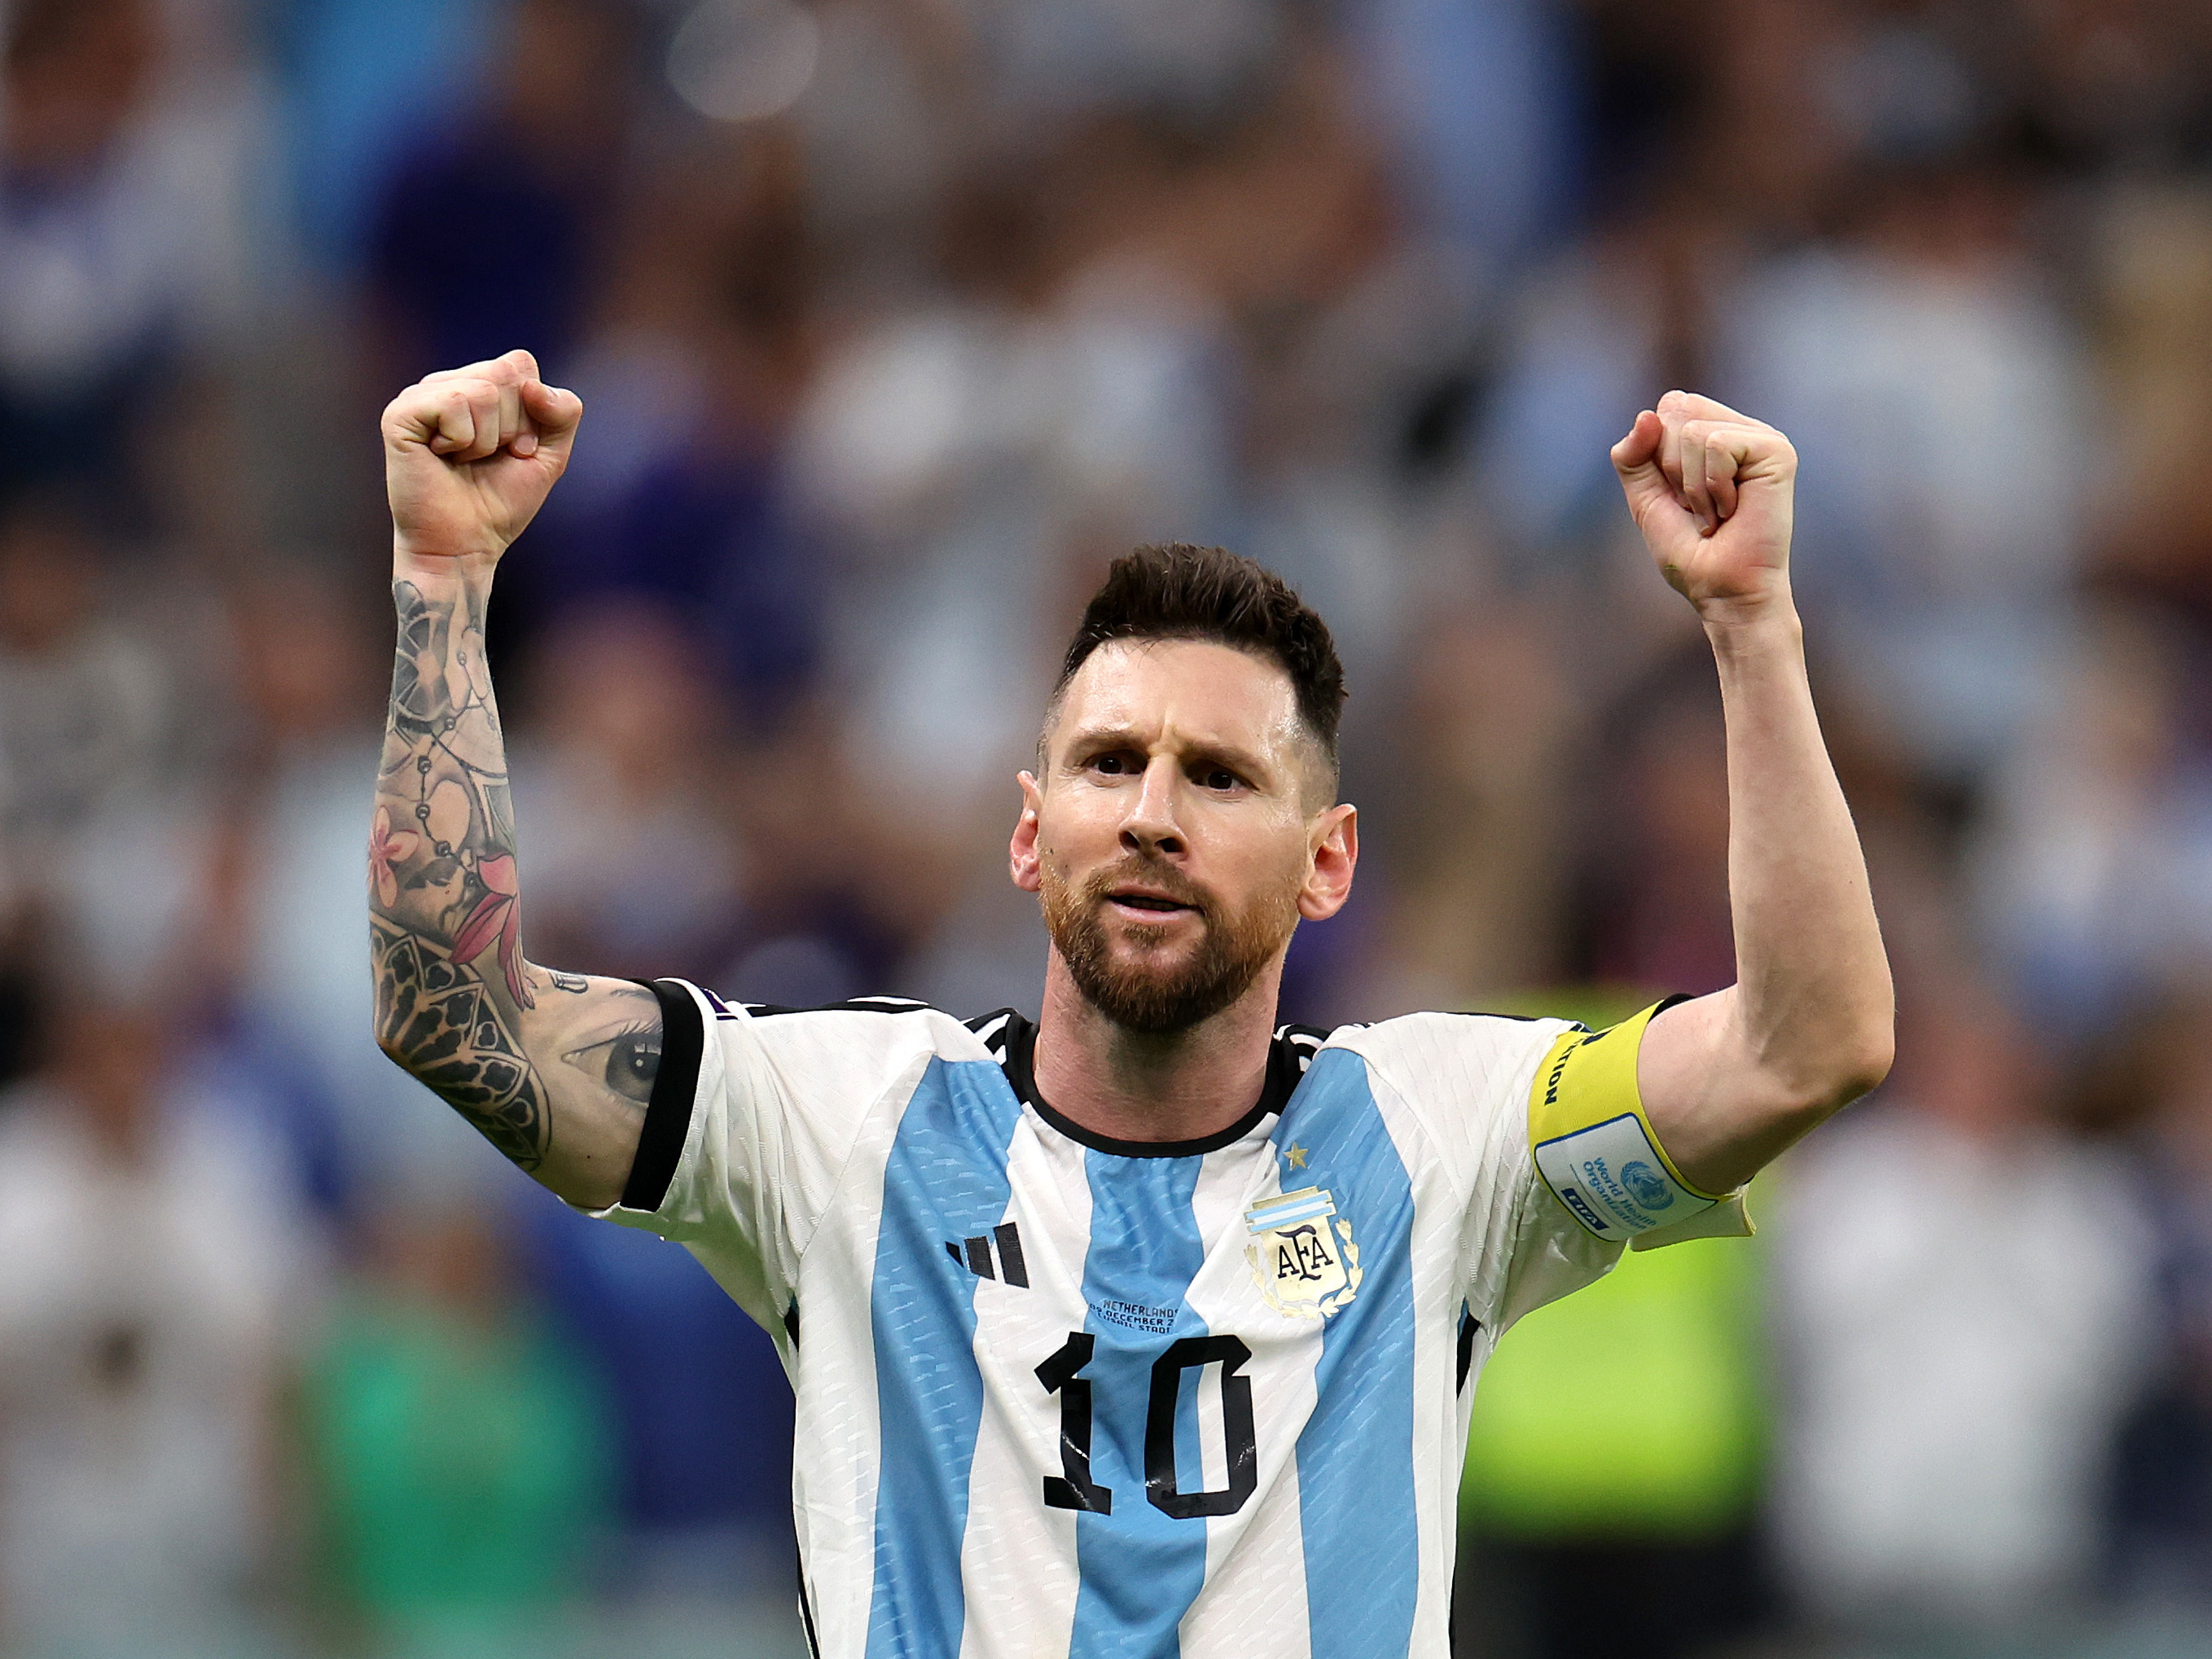 Argentina beats the Netherlands in penalty kicks at the World Cup